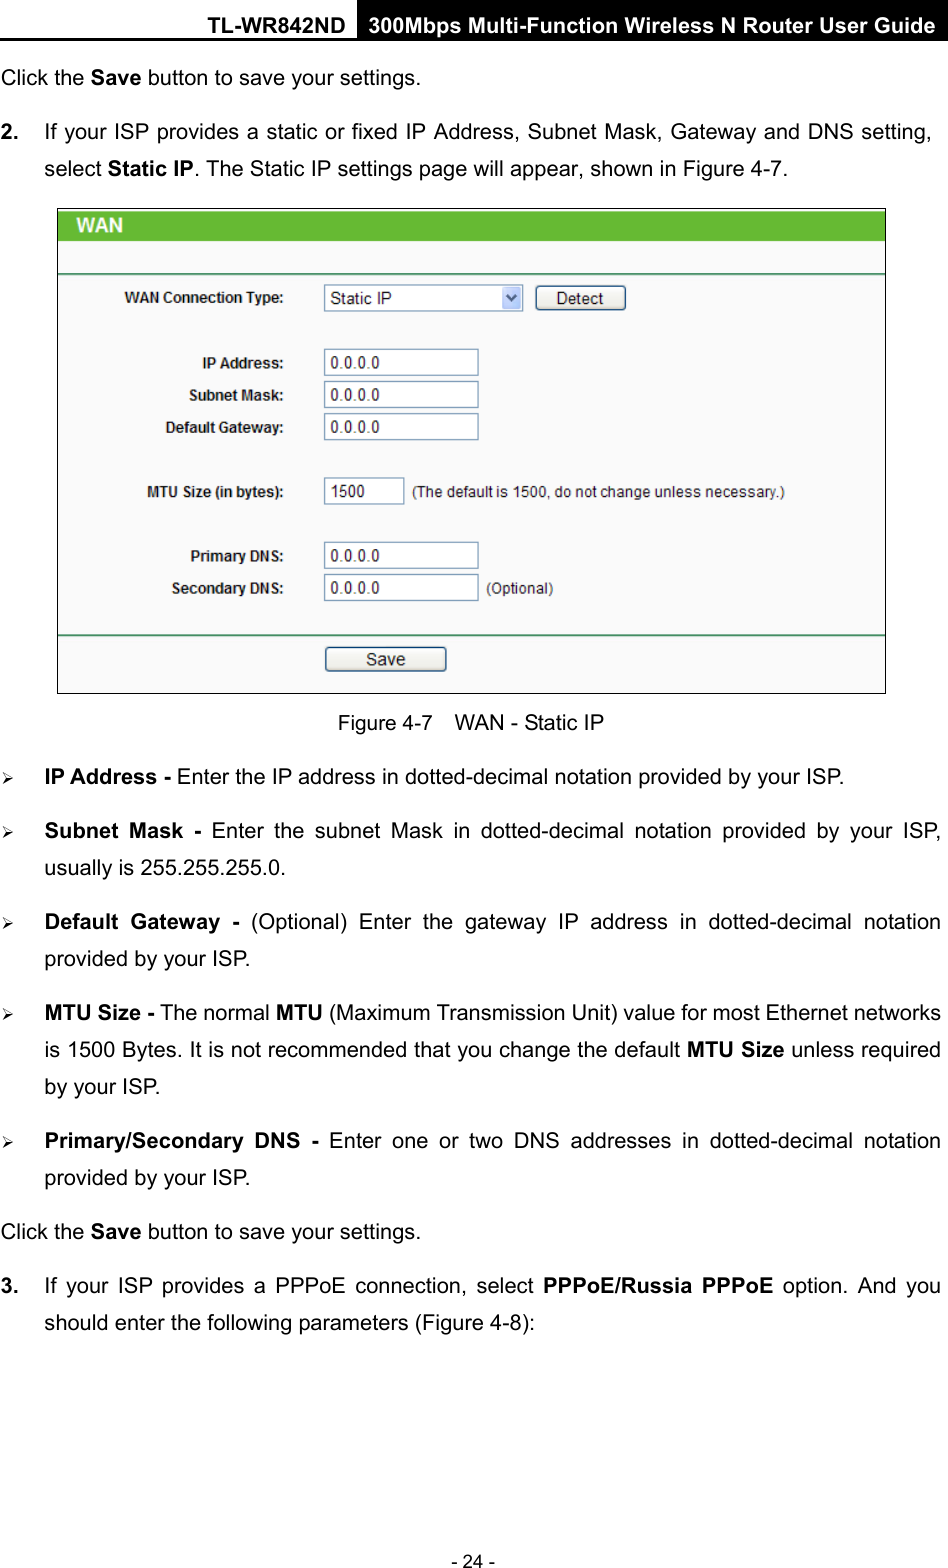 TL-WR842ND 300Mbps Multi-Function Wireless N Router User Guide  - 24 - Click the Save button to save your settings. 2. If your ISP provides a static or fixed IP Address, Subnet Mask, Gateway and DNS setting, select Static IP. The Static IP settings page will appear, shown in Figure 4-7.  Figure 4-7  WAN - Static IP  IP Address - Enter the IP address in dotted-decimal notation provided by your ISP.  Subnet Mask - Enter the subnet Mask in dotted-decimal notation provided by your ISP, usually is 255.255.255.0.  Default Gateway - (Optional) Enter the gateway IP address in dotted-decimal notation provided by your ISP.  MTU Size - The normal MTU (Maximum Transmission Unit) value for most Ethernet networks is 1500 Bytes. It is not recommended that you change the default MTU Size unless required by your ISP.    Primary/Secondary DNS -  Enter  one or two DNS addresses in dotted-decimal notation provided by your ISP. Click the Save button to save your settings. 3. If your ISP provides a PPPoE connection, select PPPoE/Russia PPPoE option.  And you should enter the following parameters (Figure 4-8): 